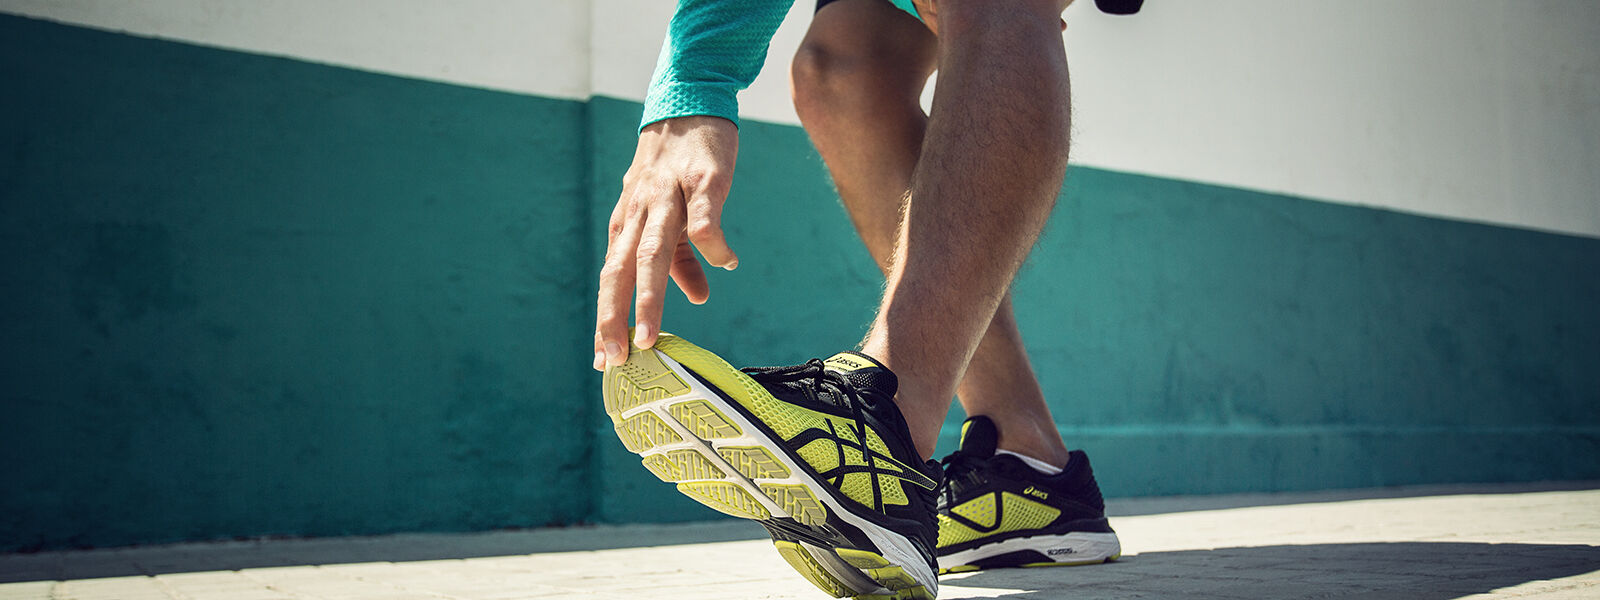 Common running injuries and how to heal | ASICS